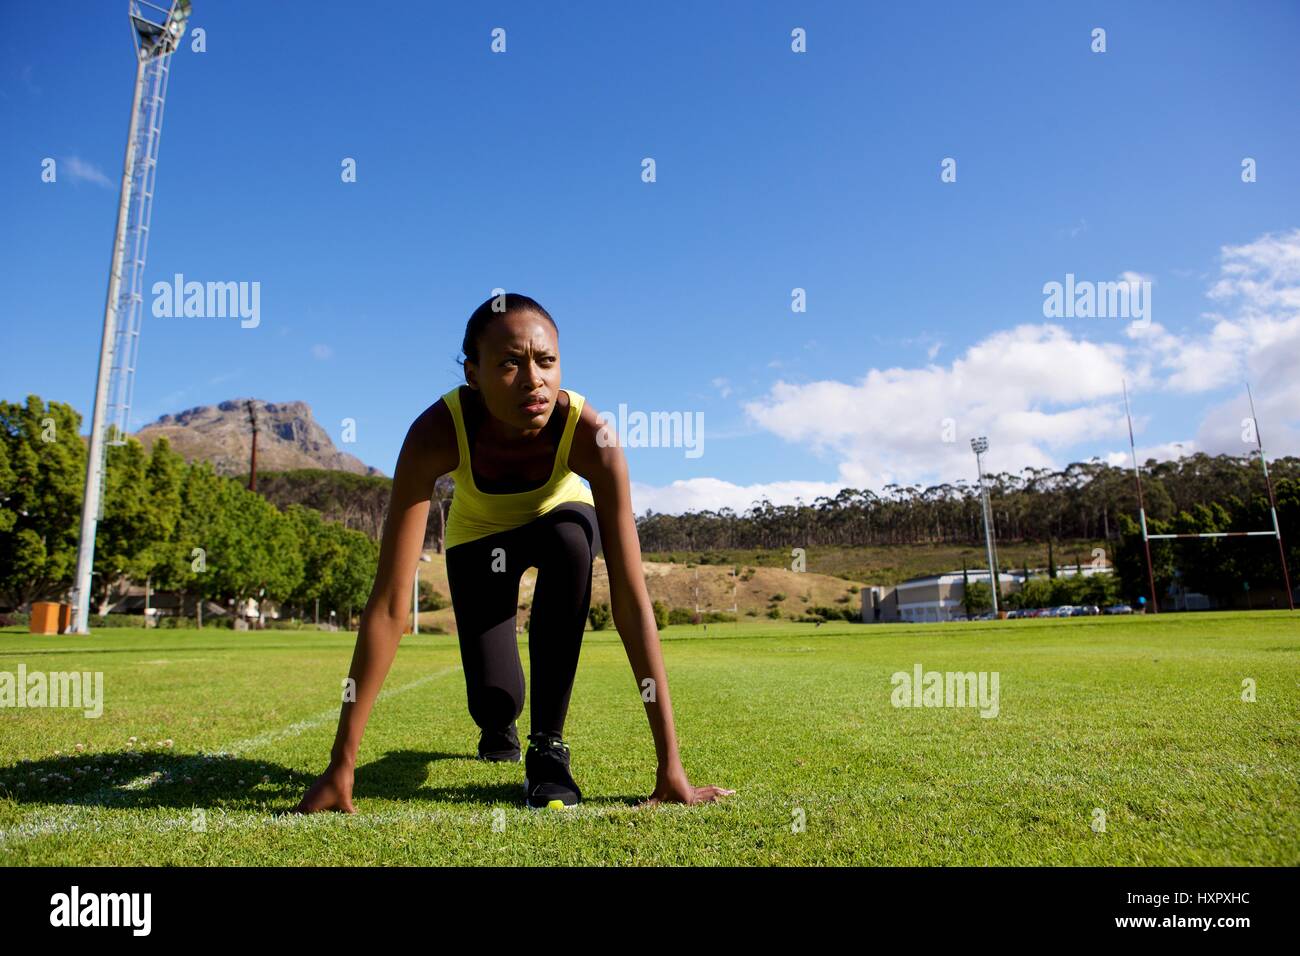 Portrait of young female athlete in starting position Stock Photo